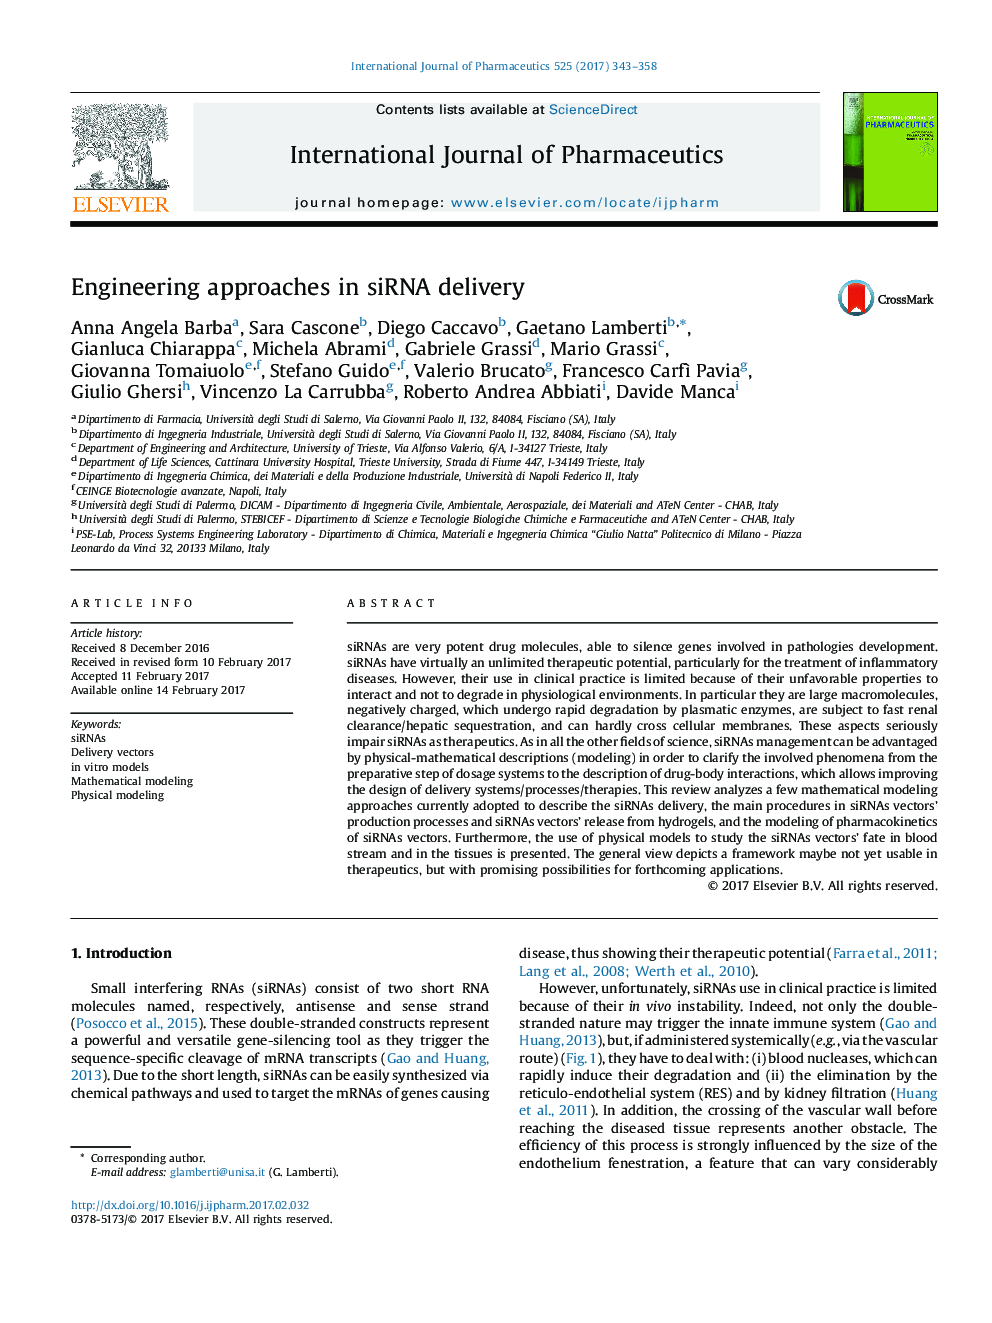 Engineering approaches in siRNA delivery